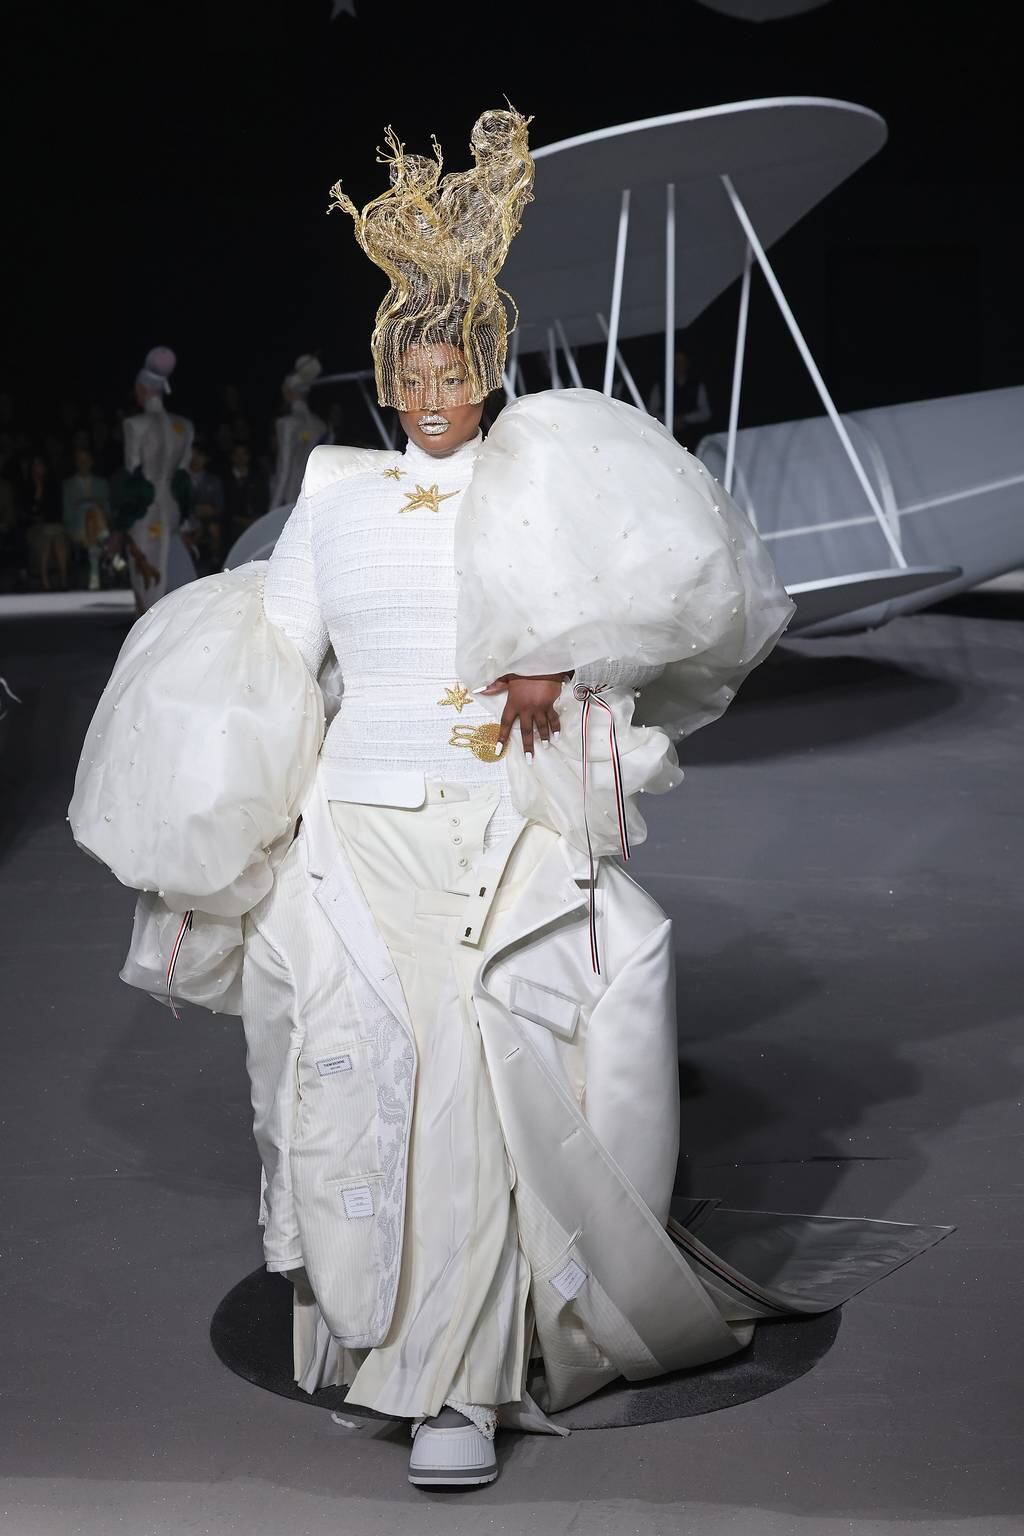 Many observers noted a lack of curve models at NYFW this season. Precious Lee closing Thom Browne's show was an exception.